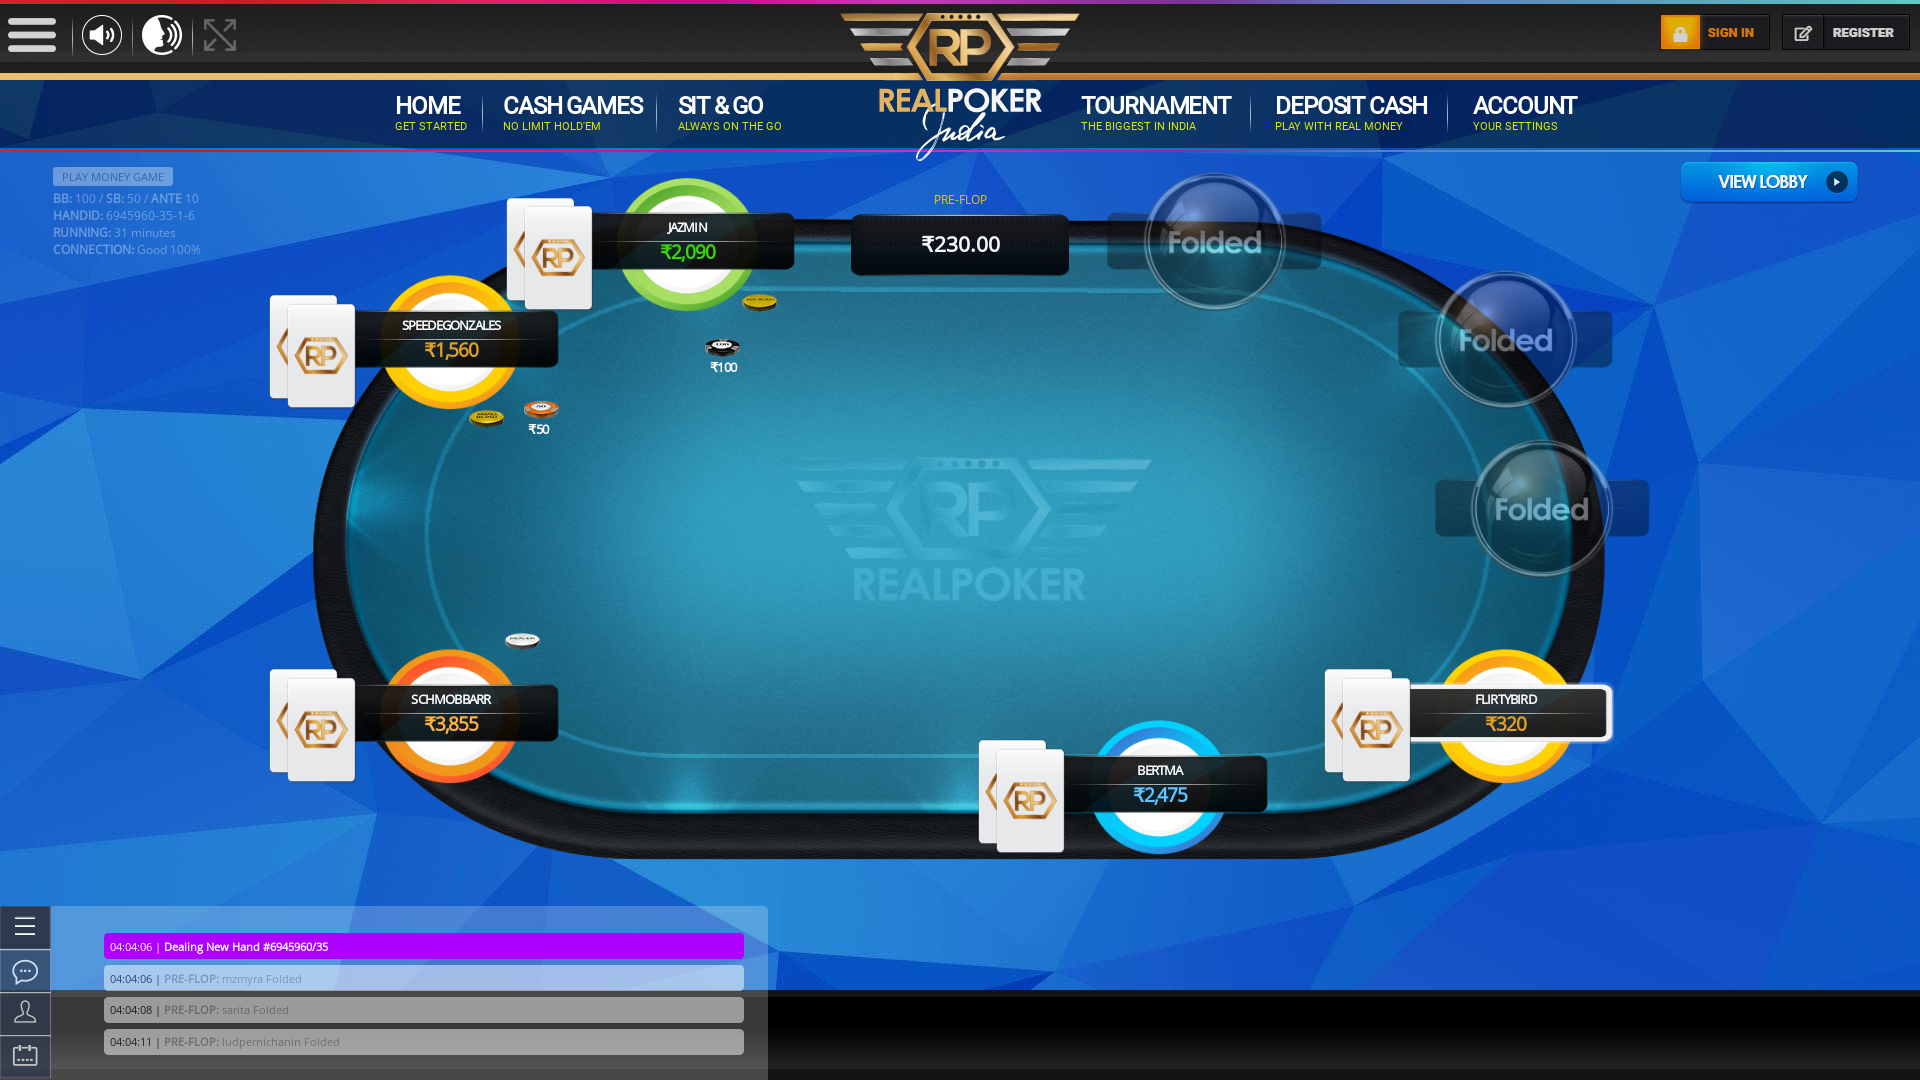 Real poker on a 10 player table in the 3 game